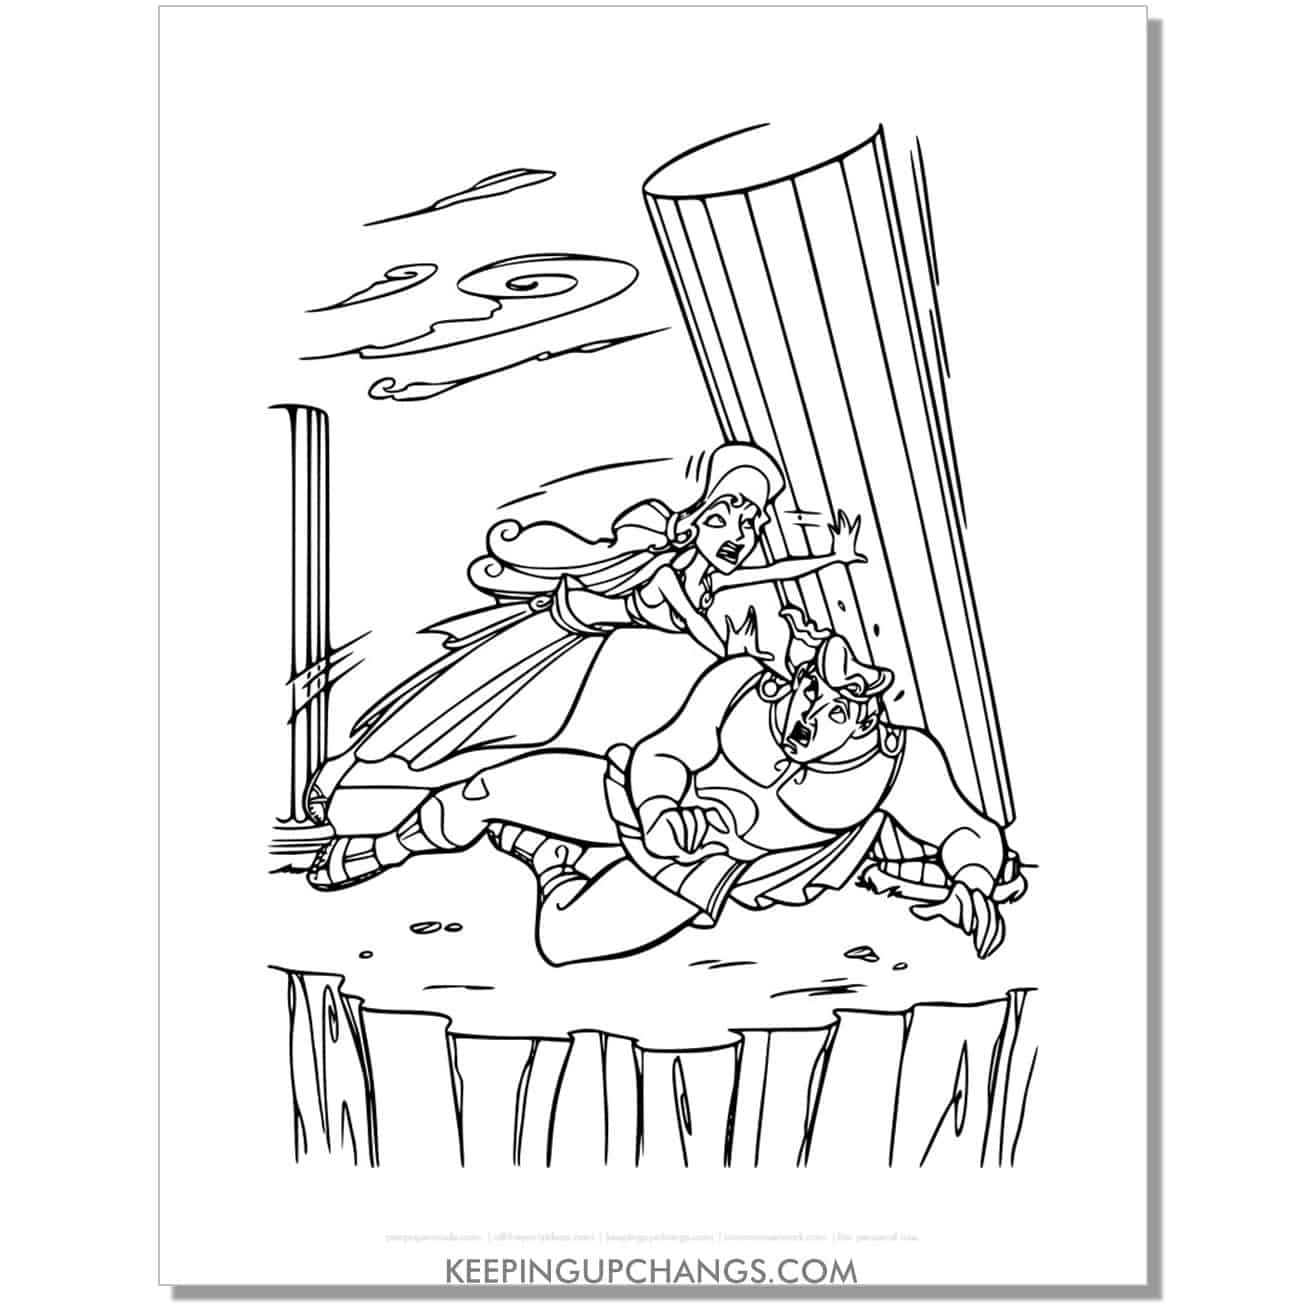 meg saves column from falling on hercules coloring page, sheet.